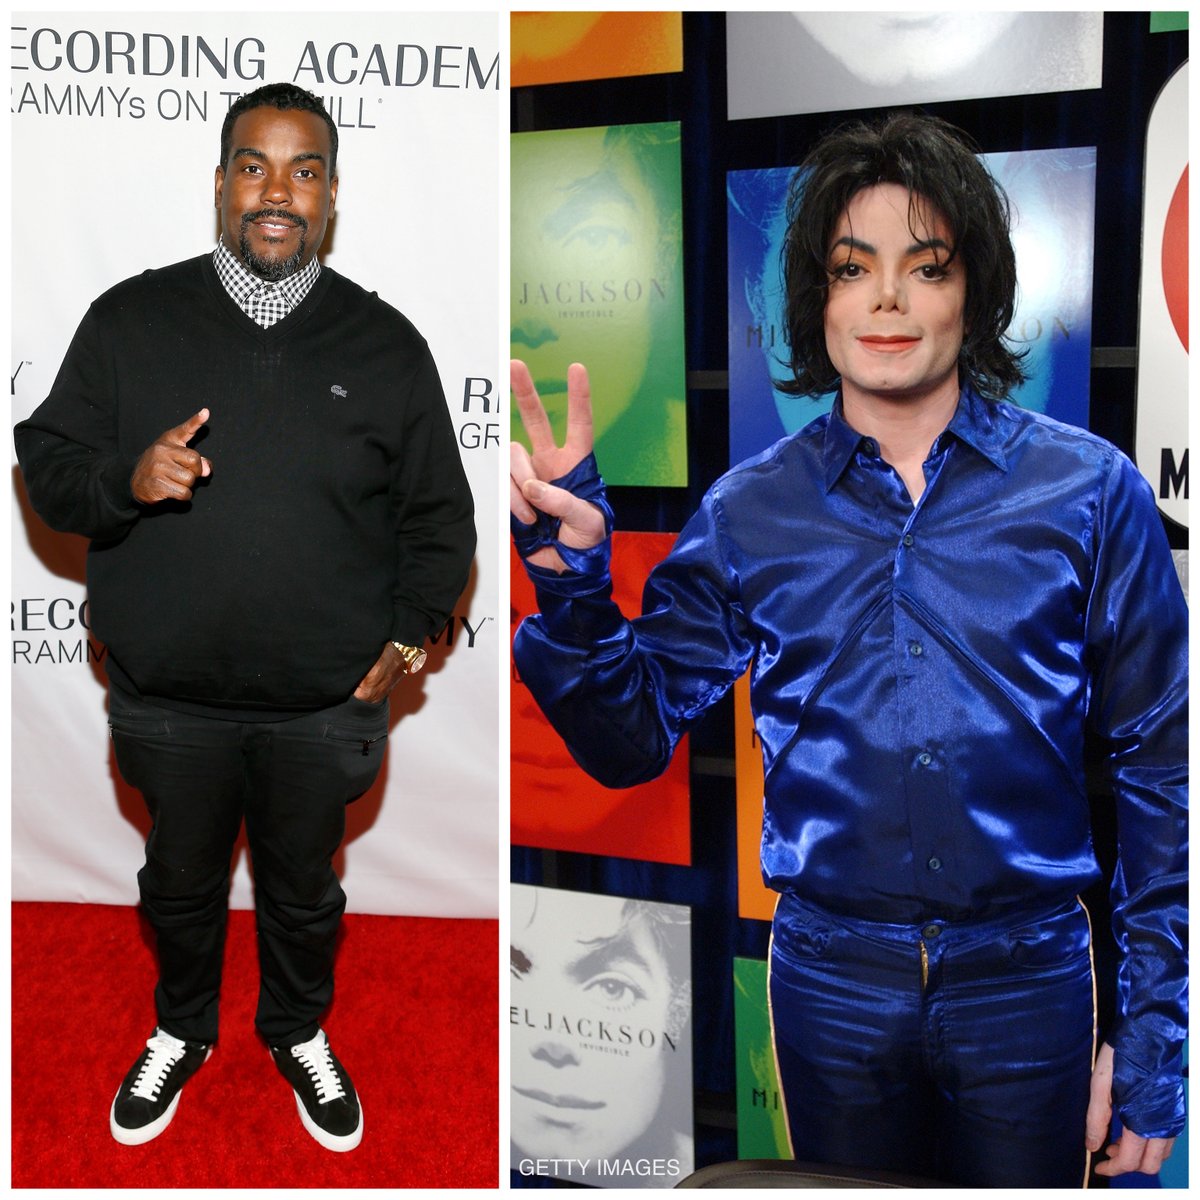 Producer Rodney Jerkins recalls that his recording sessions with Michael Jackson were the most fun of his career. He says Michael pulled many pranks on him. Jerkins most favorite MJ memory was cruising around Manhattan with Michael in a Bentley convertible.